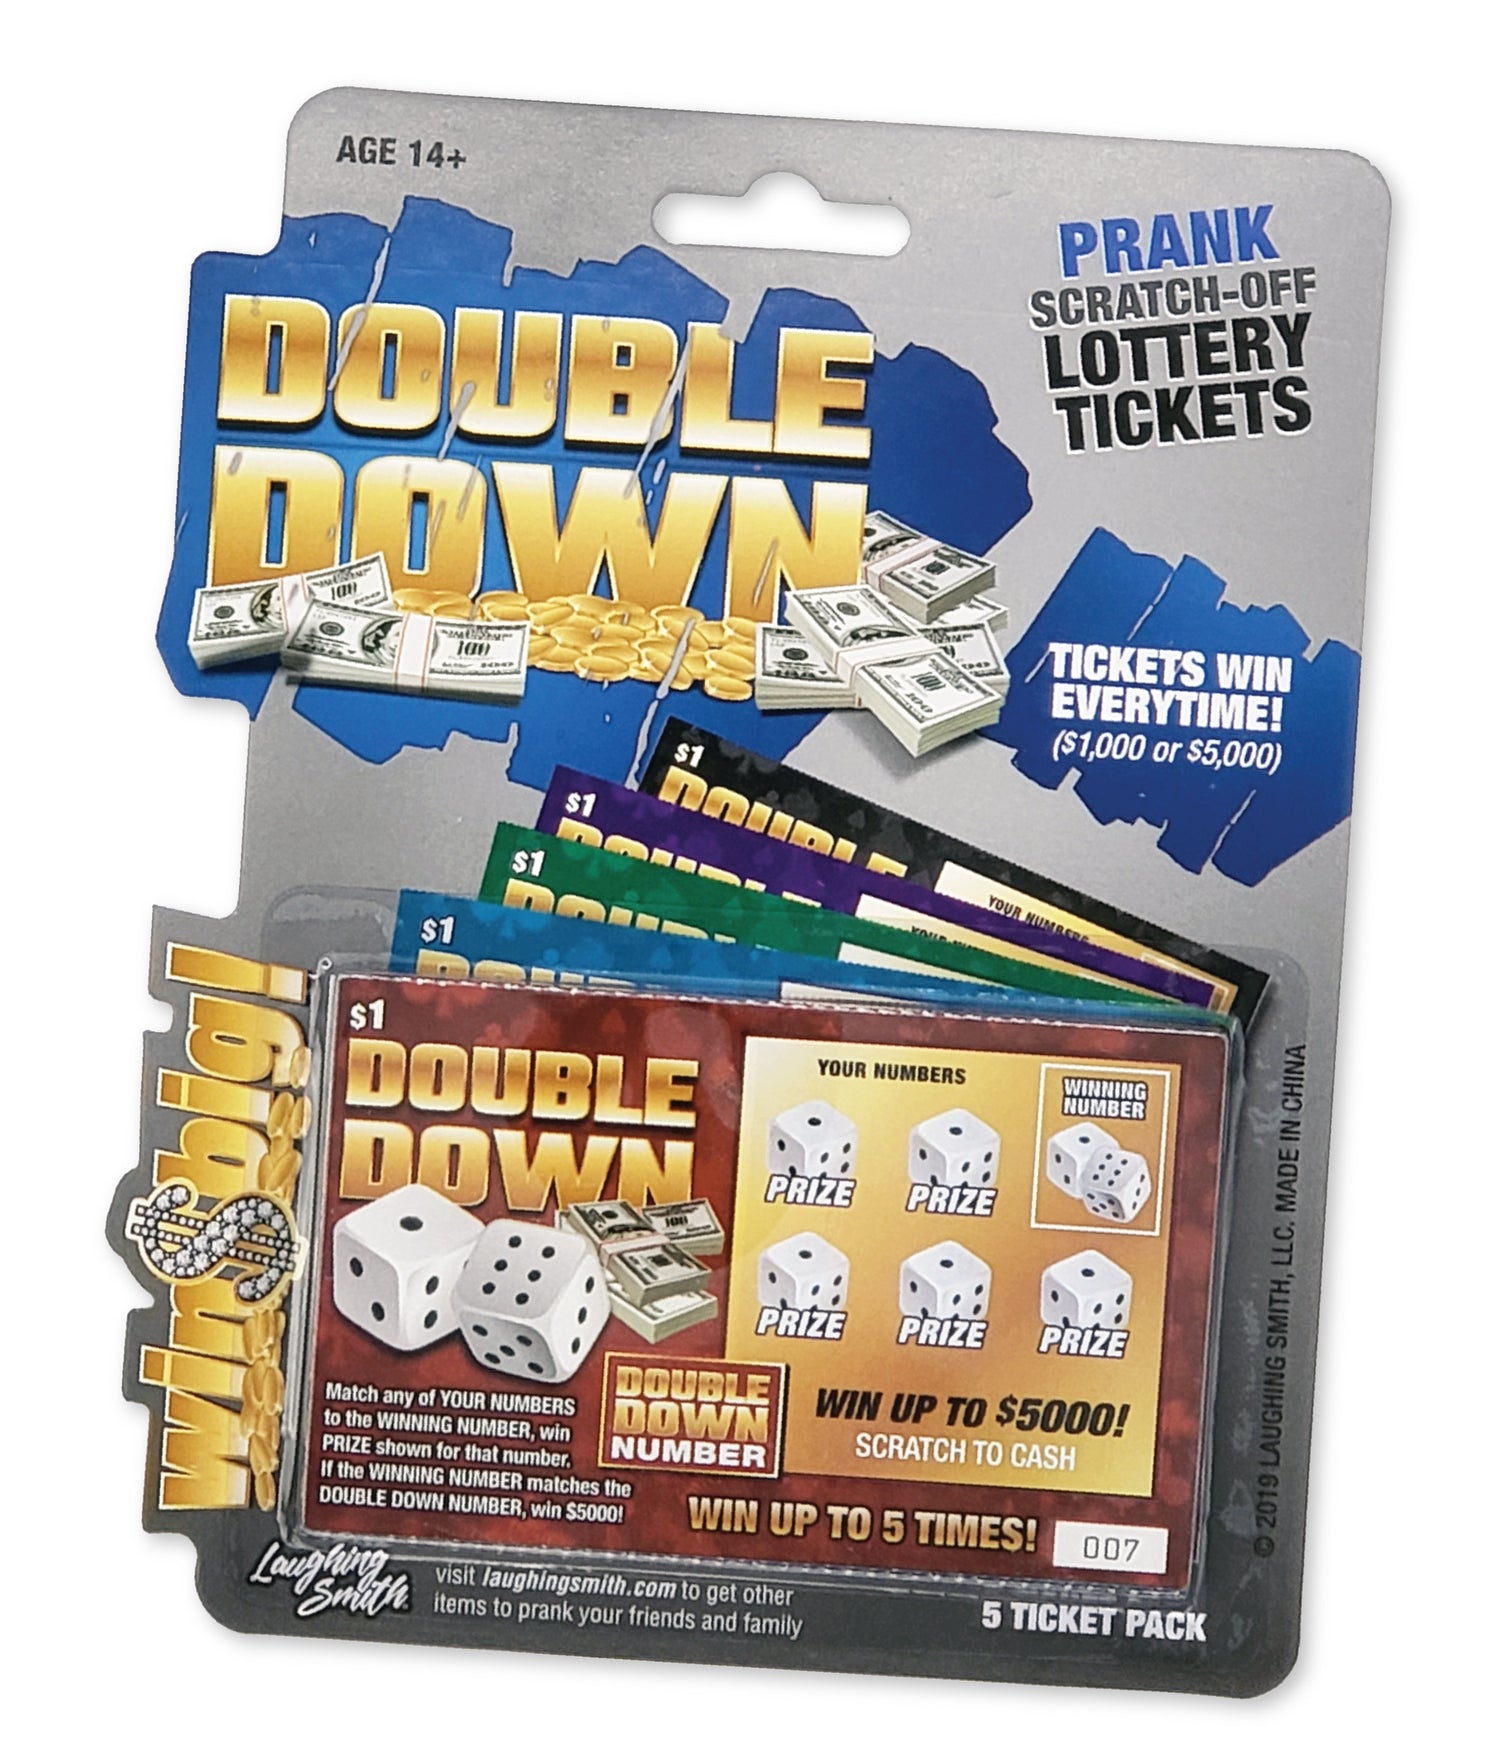  Prank Lottery Tickets and Scratch Cards Look Real - $1